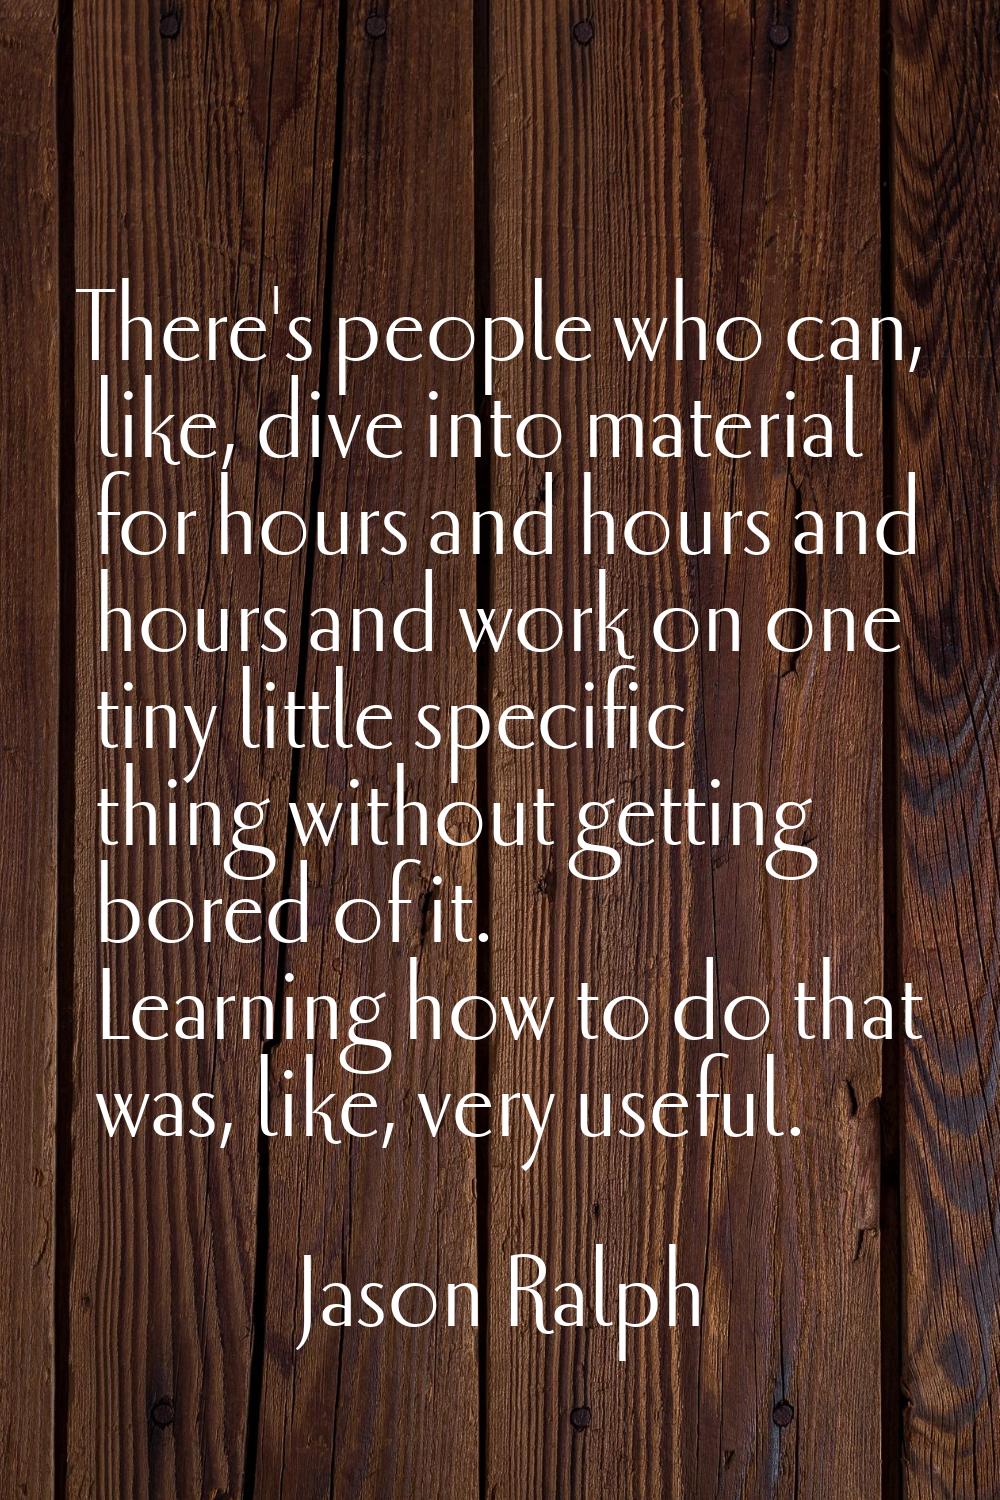 There's people who can, like, dive into material for hours and hours and hours and work on one tiny